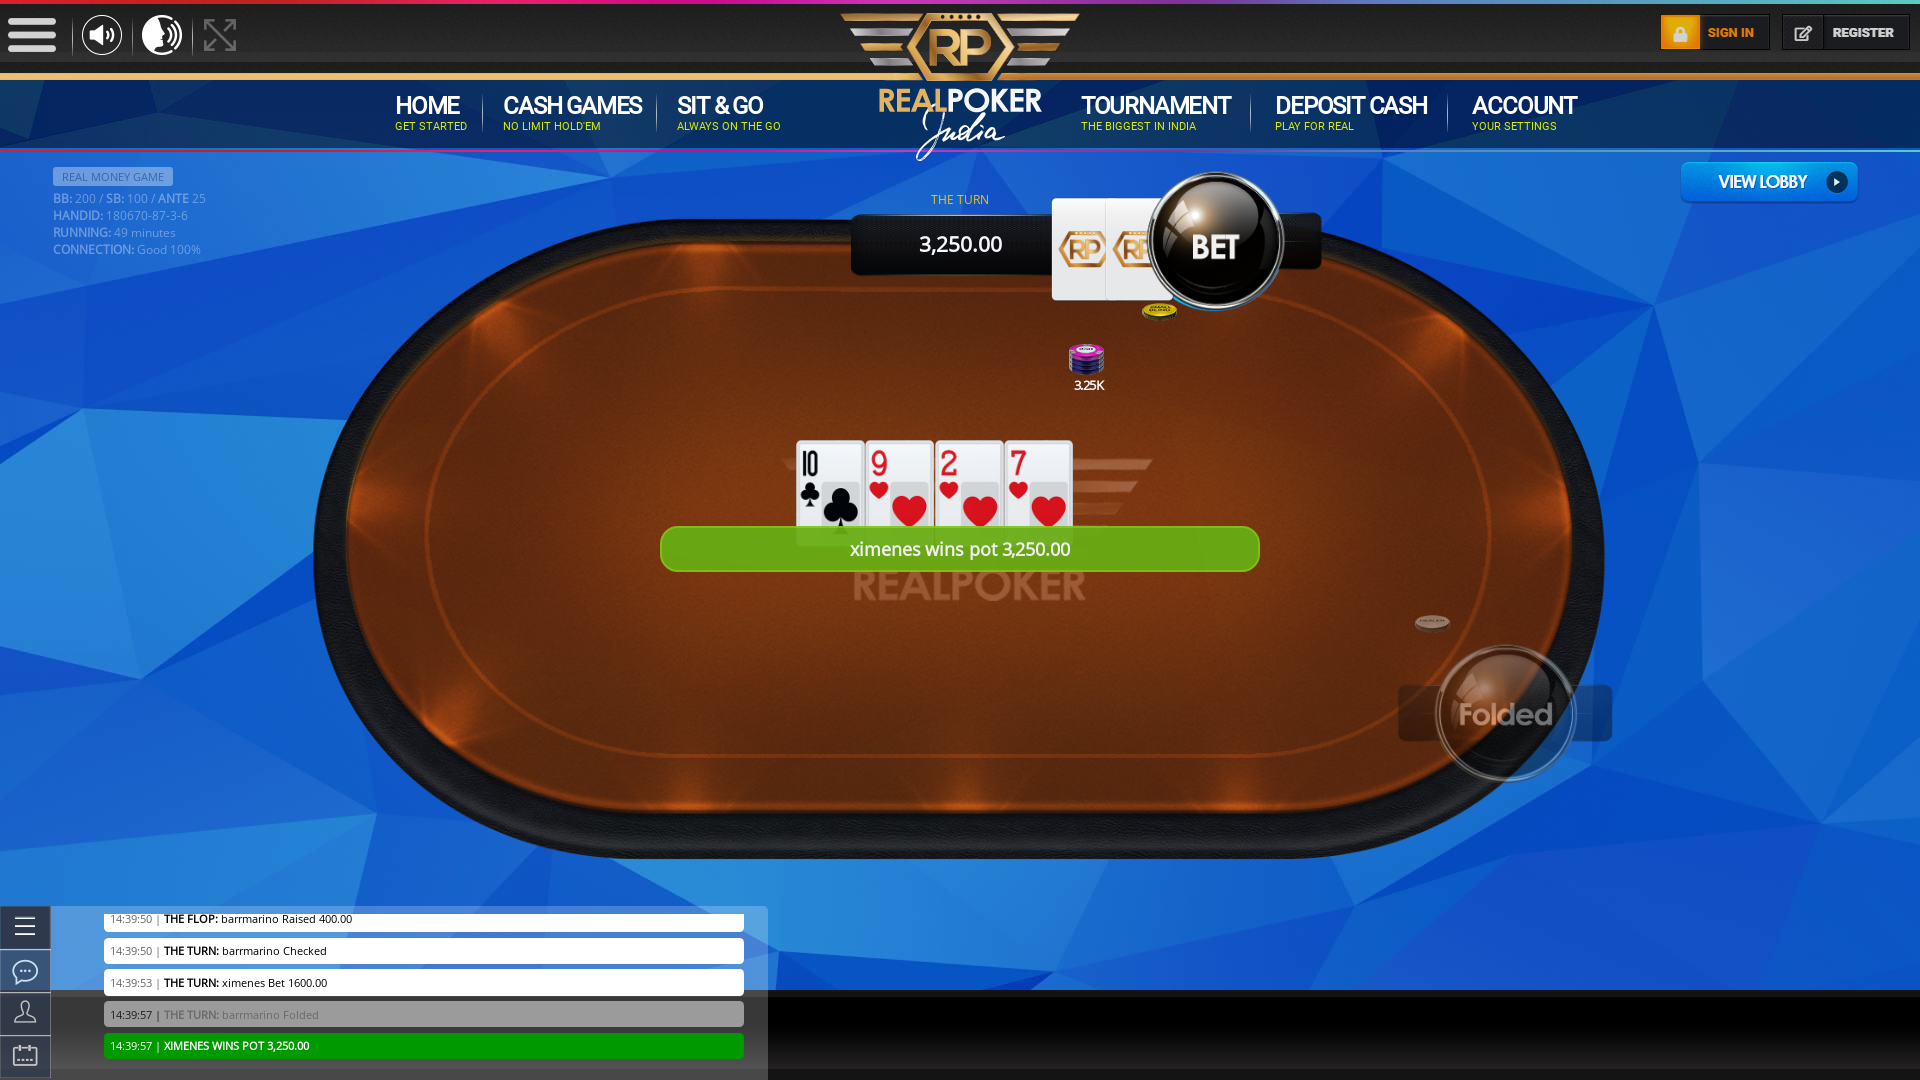 Indian online poker on a 10 player table in the 49th minute match up